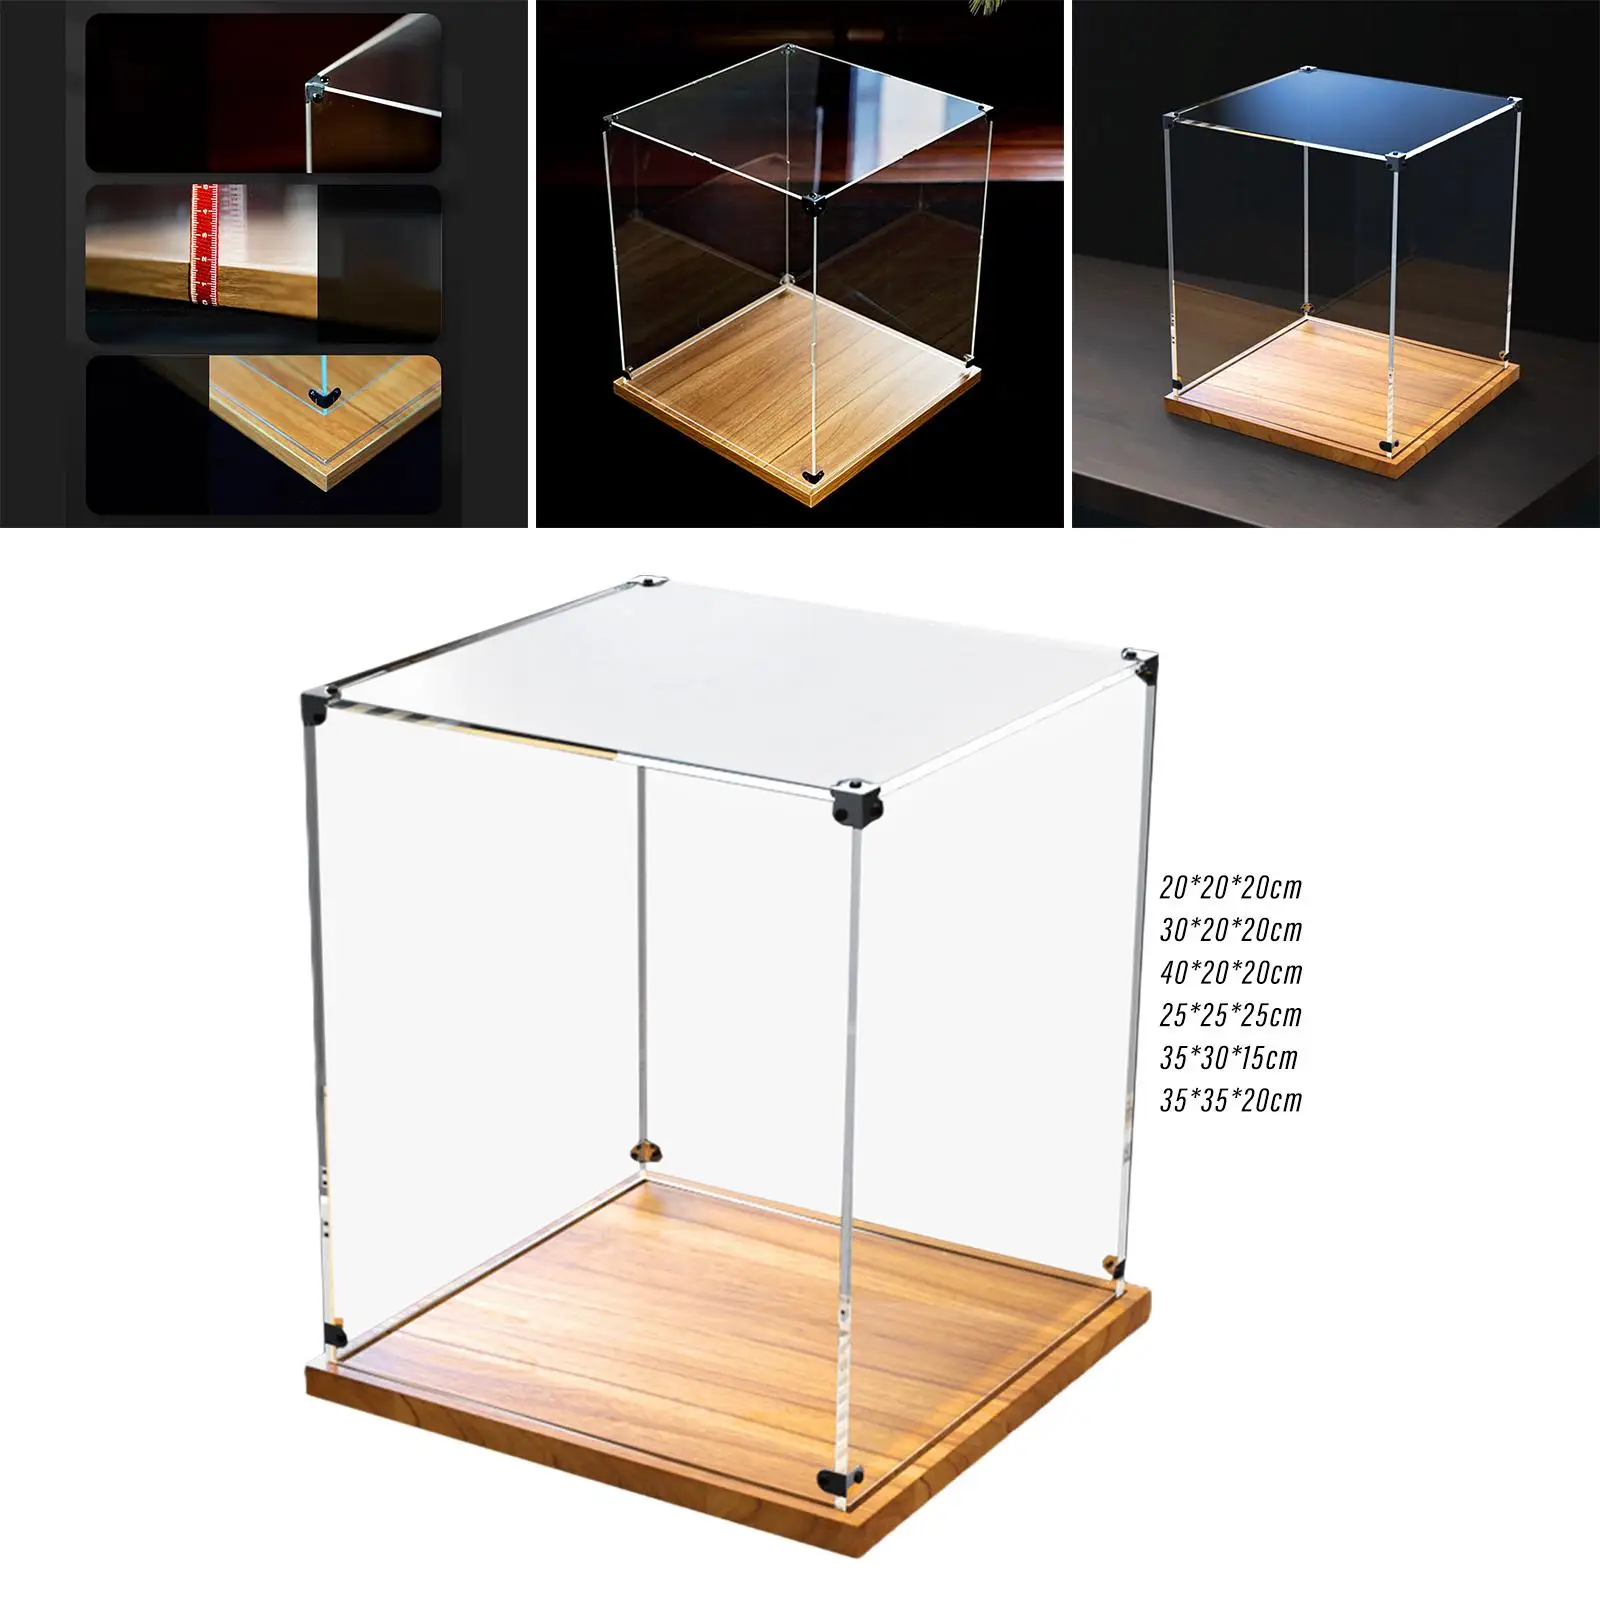 Transparent Display Box Decoration with Wooden Base Multipurpose Durable Stable Practical Showcase for Model Miniature Figurines